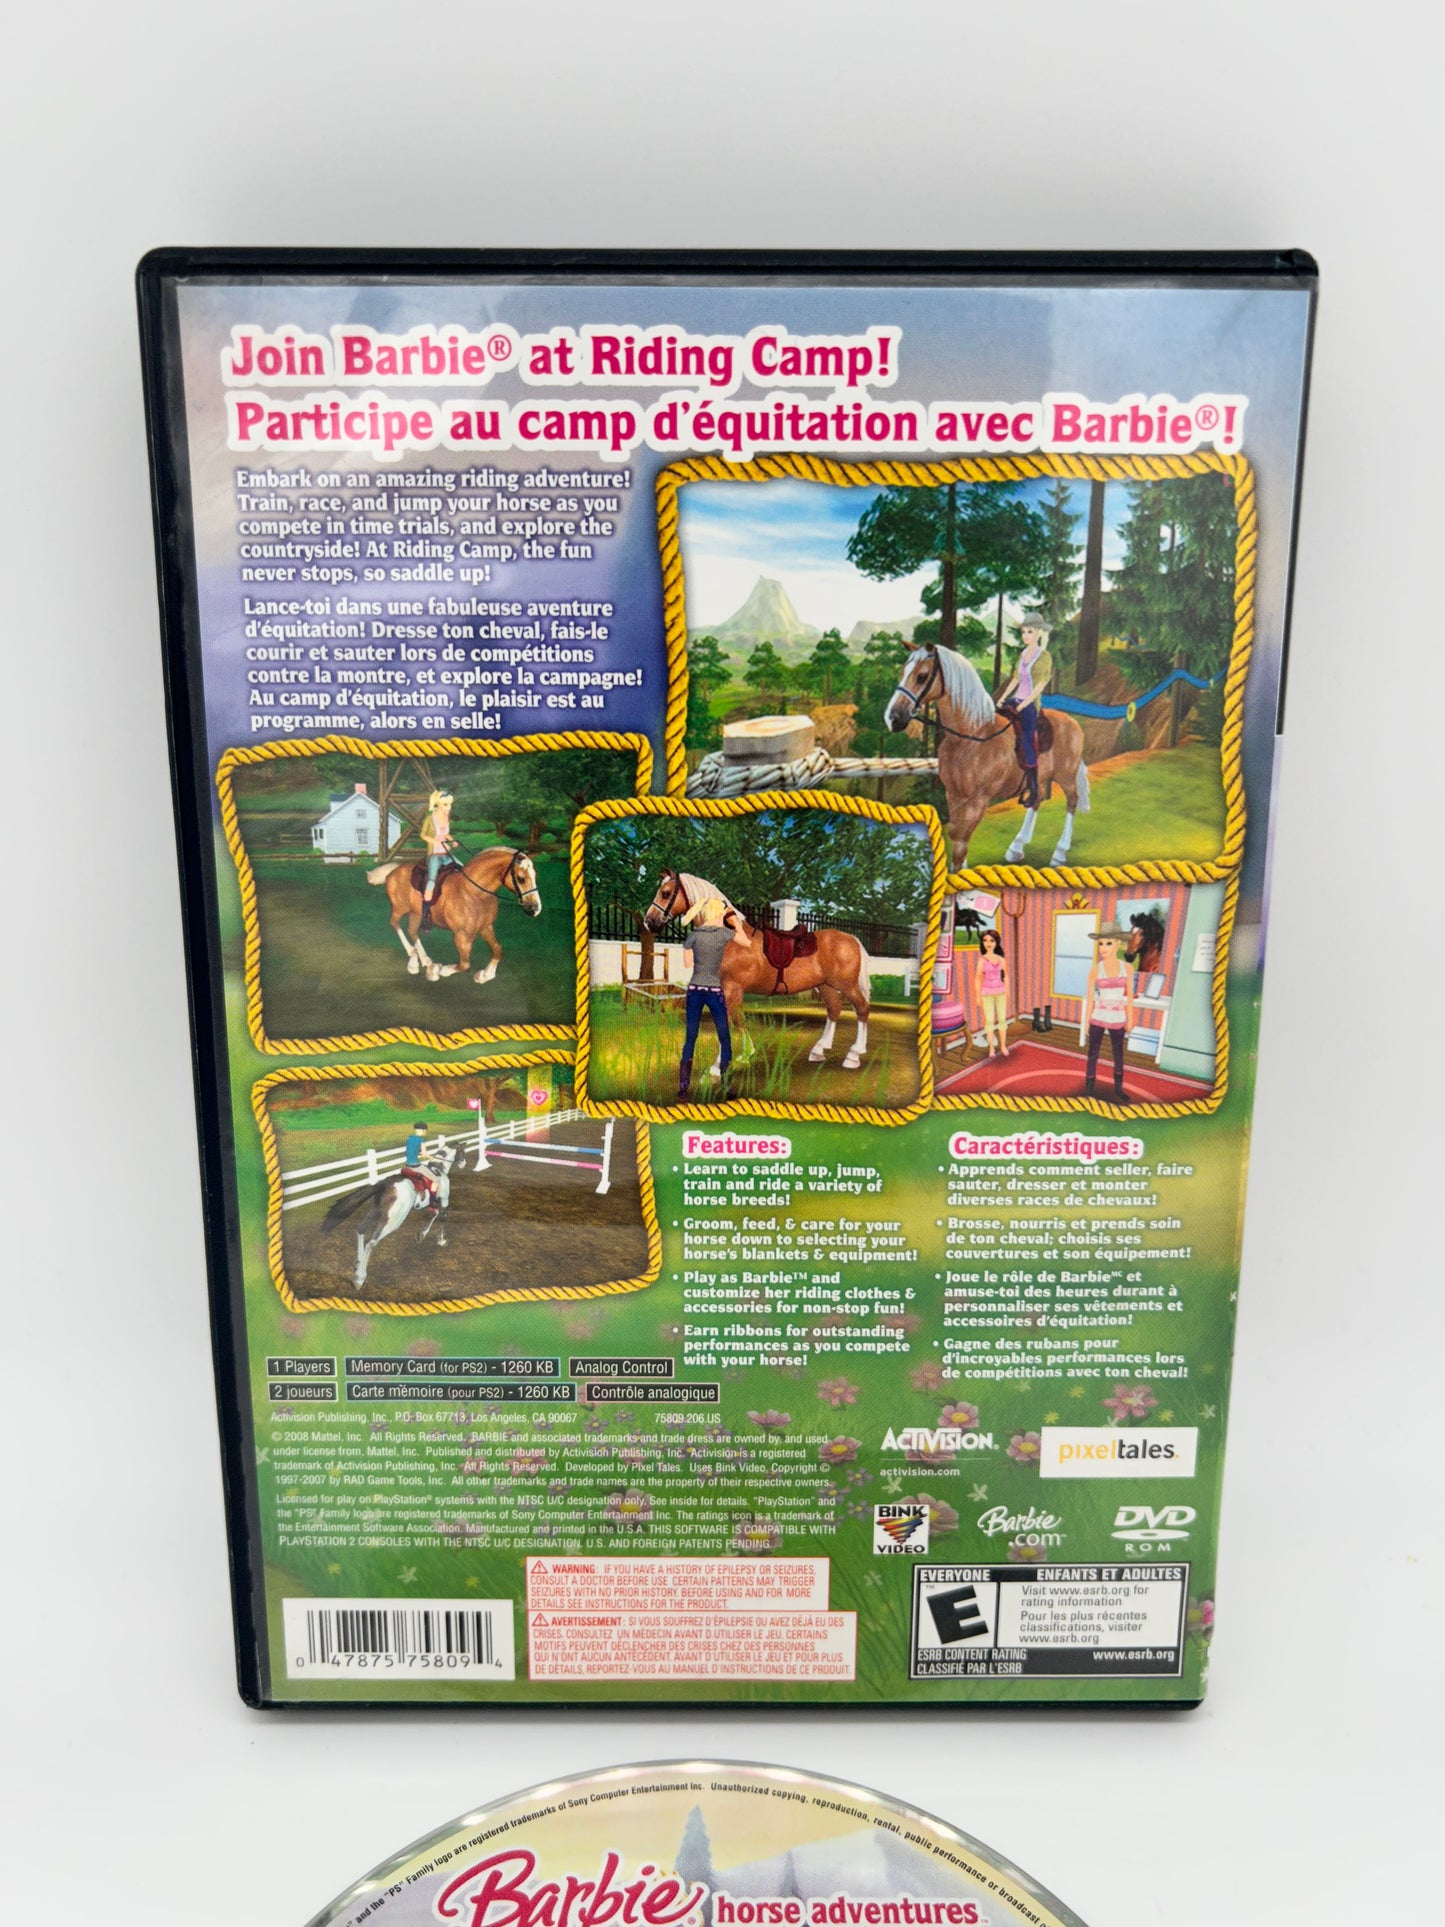 SONY PLAYSTATiON 2 [PS2] | BARBiE HORSE ADVENTURES RiDiNG CAMP